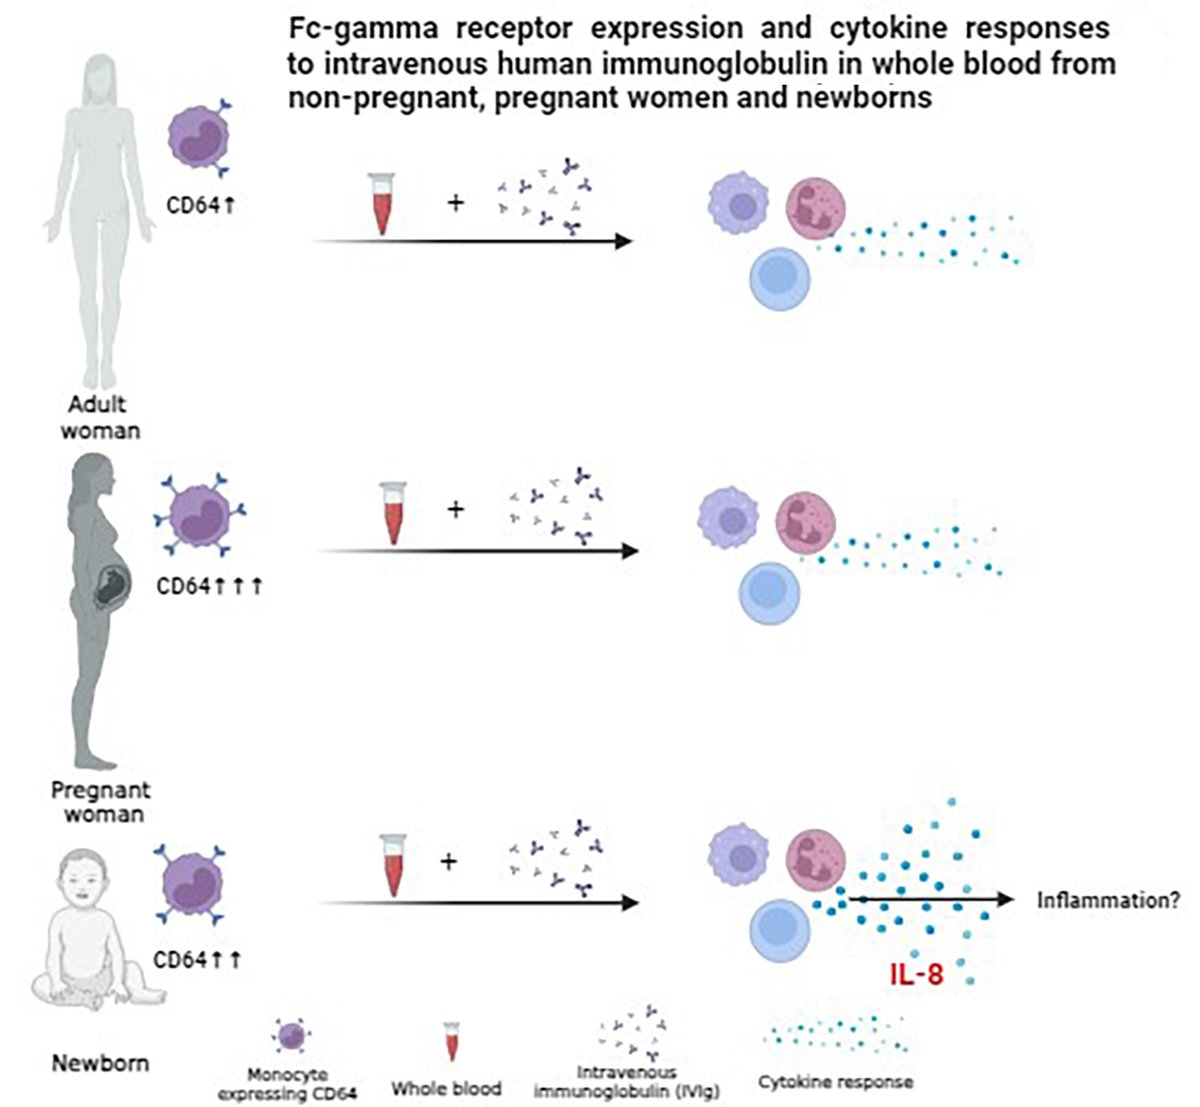 Ahead of print Fc-gamma receptor expression and cytokine responses to intravenous human immunoglobulin in whole blood from non-pregnant and pregnant women and newborns advances.umw.edu.pl/en/ahead-of-pr…